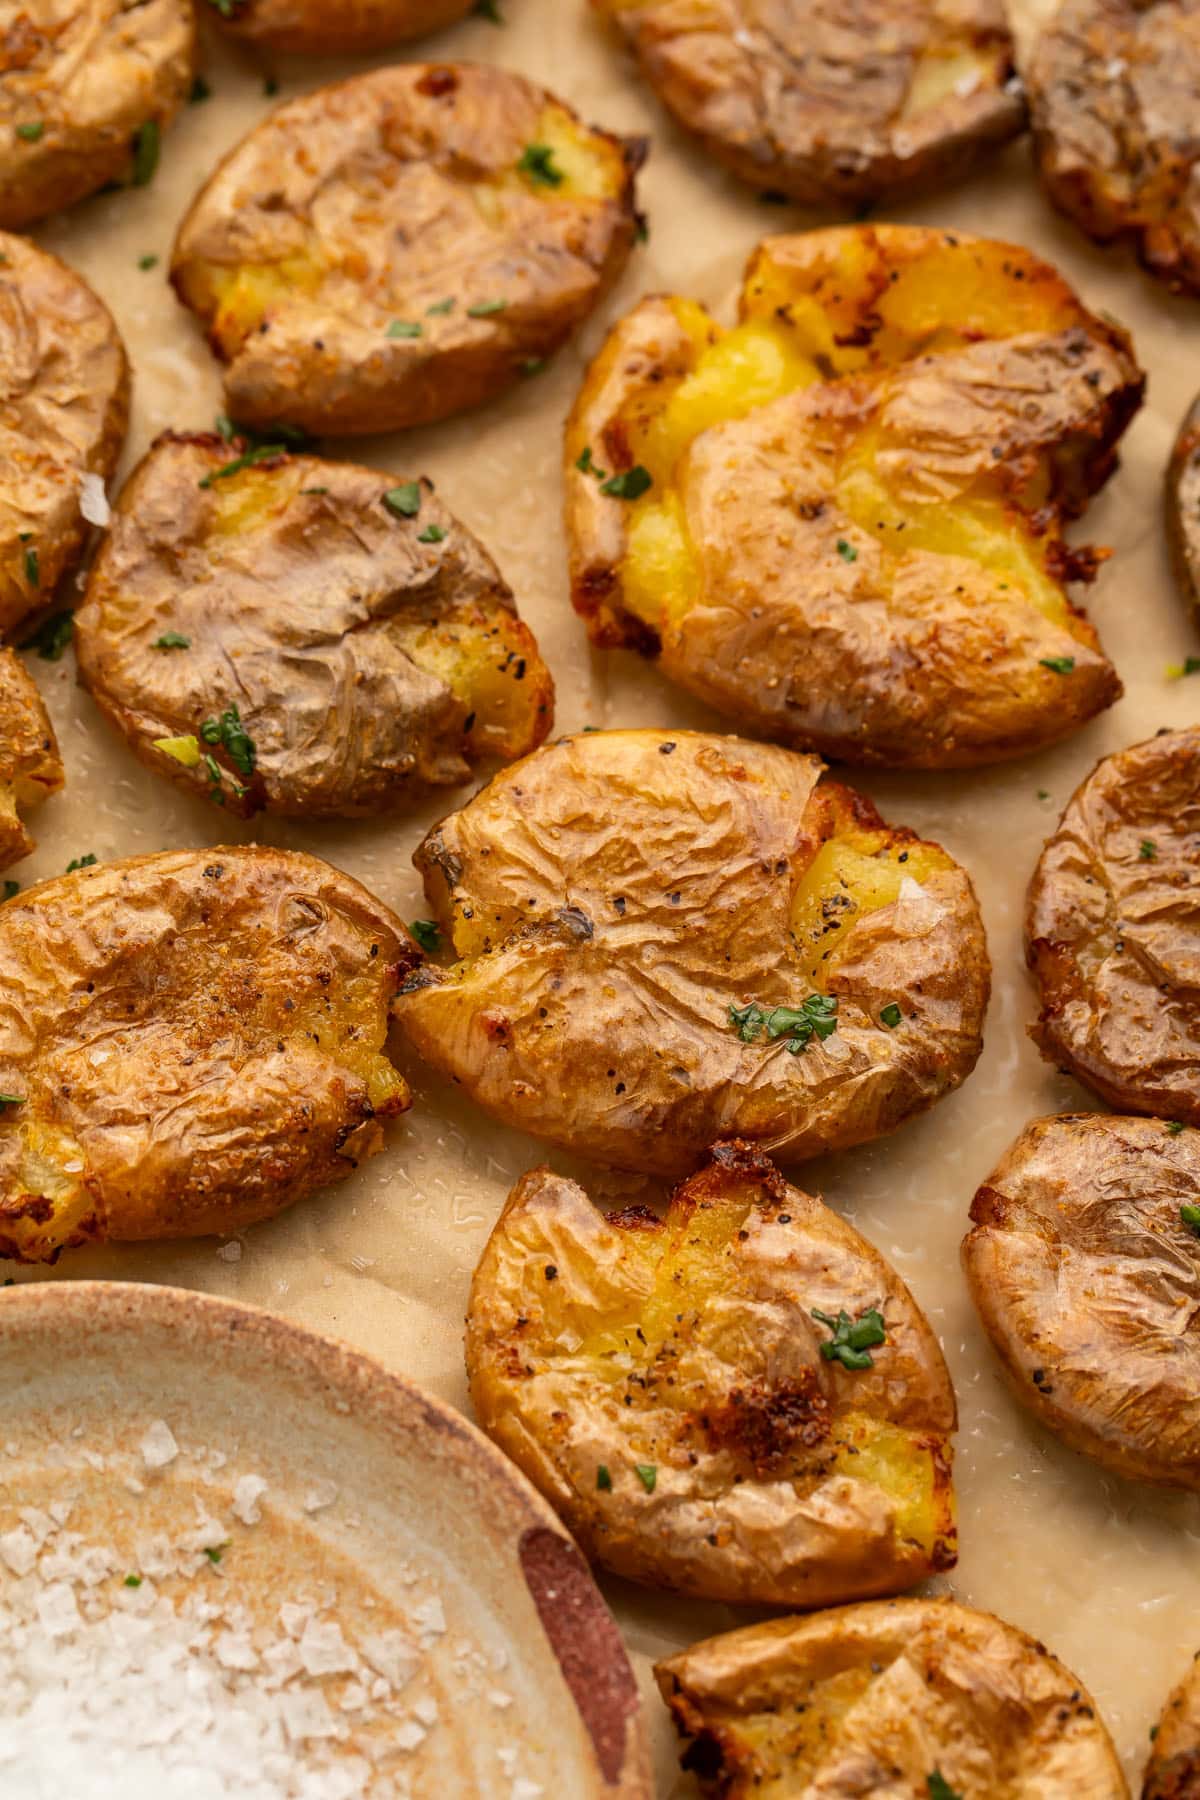 Multiple smashed potatoes, cooked in the air fryer, arranged on a sheet of parchment paper next to a small dish of salt.